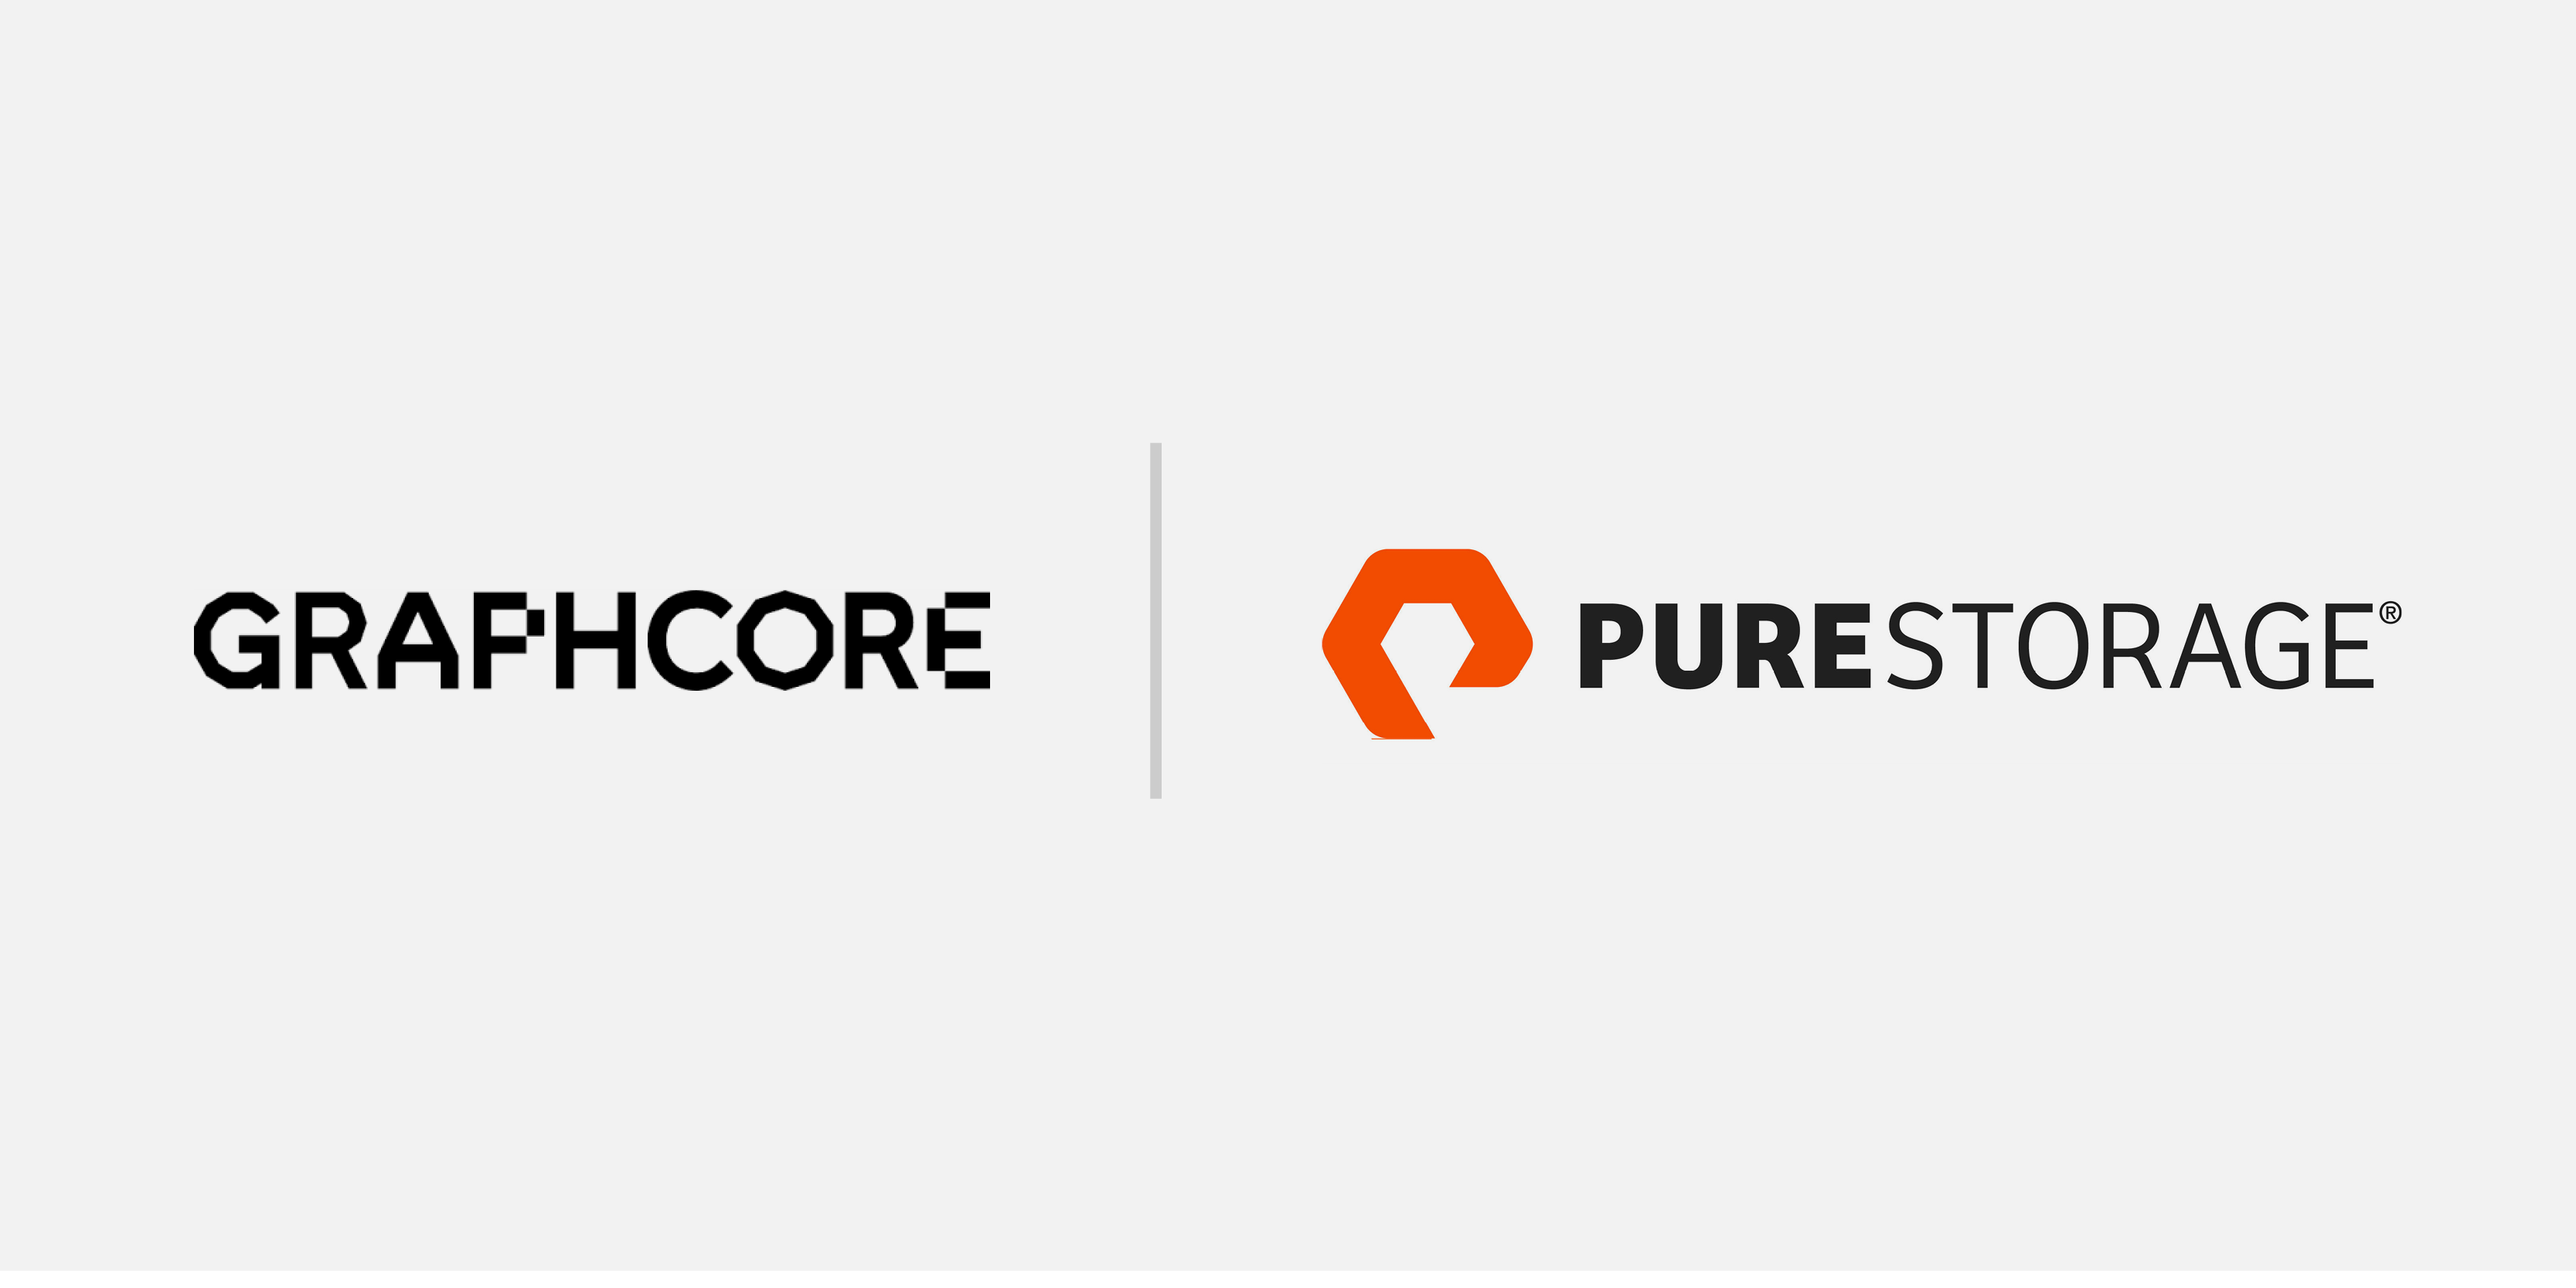 Portworx by Pure Storage Announces Support for Google Cloud's Anthos on  bare metal